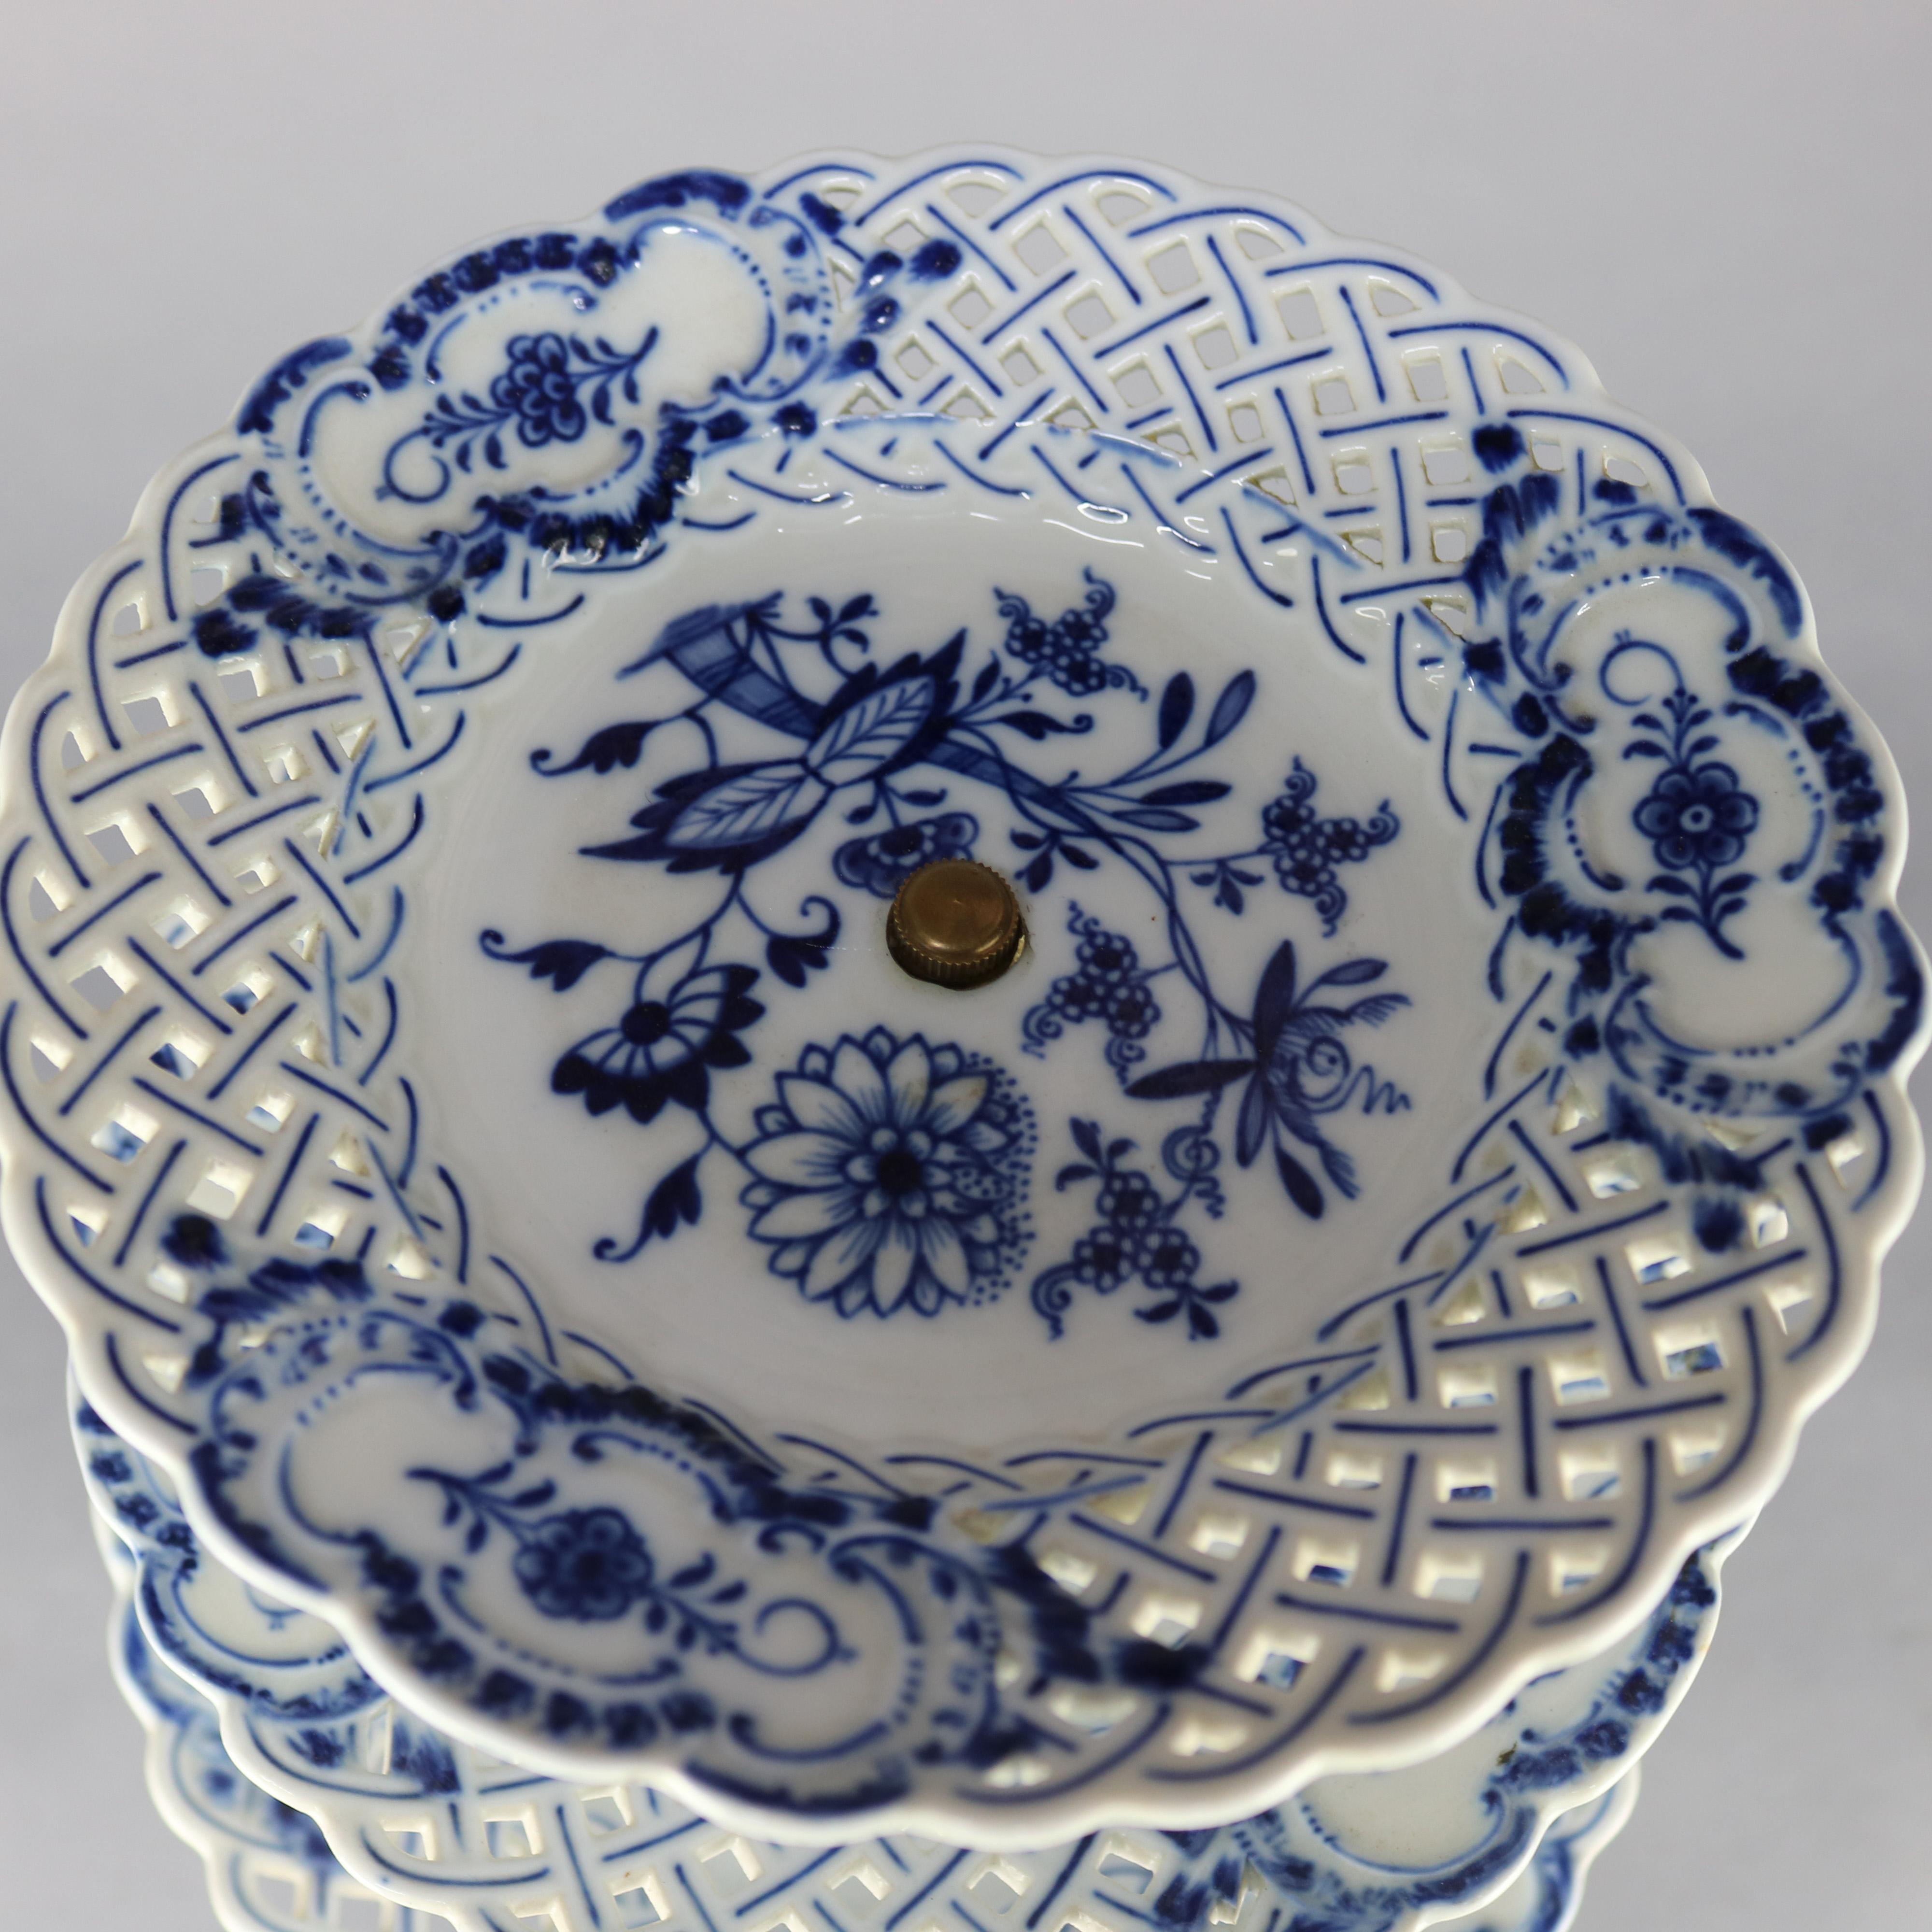 An antique German Meissen serving tray offers porcelain construction with blue floral decoration on three reticulated and tiered trays raised on decorated pedestal, marked on base as photographed, c1900

Measures: Tier one 11